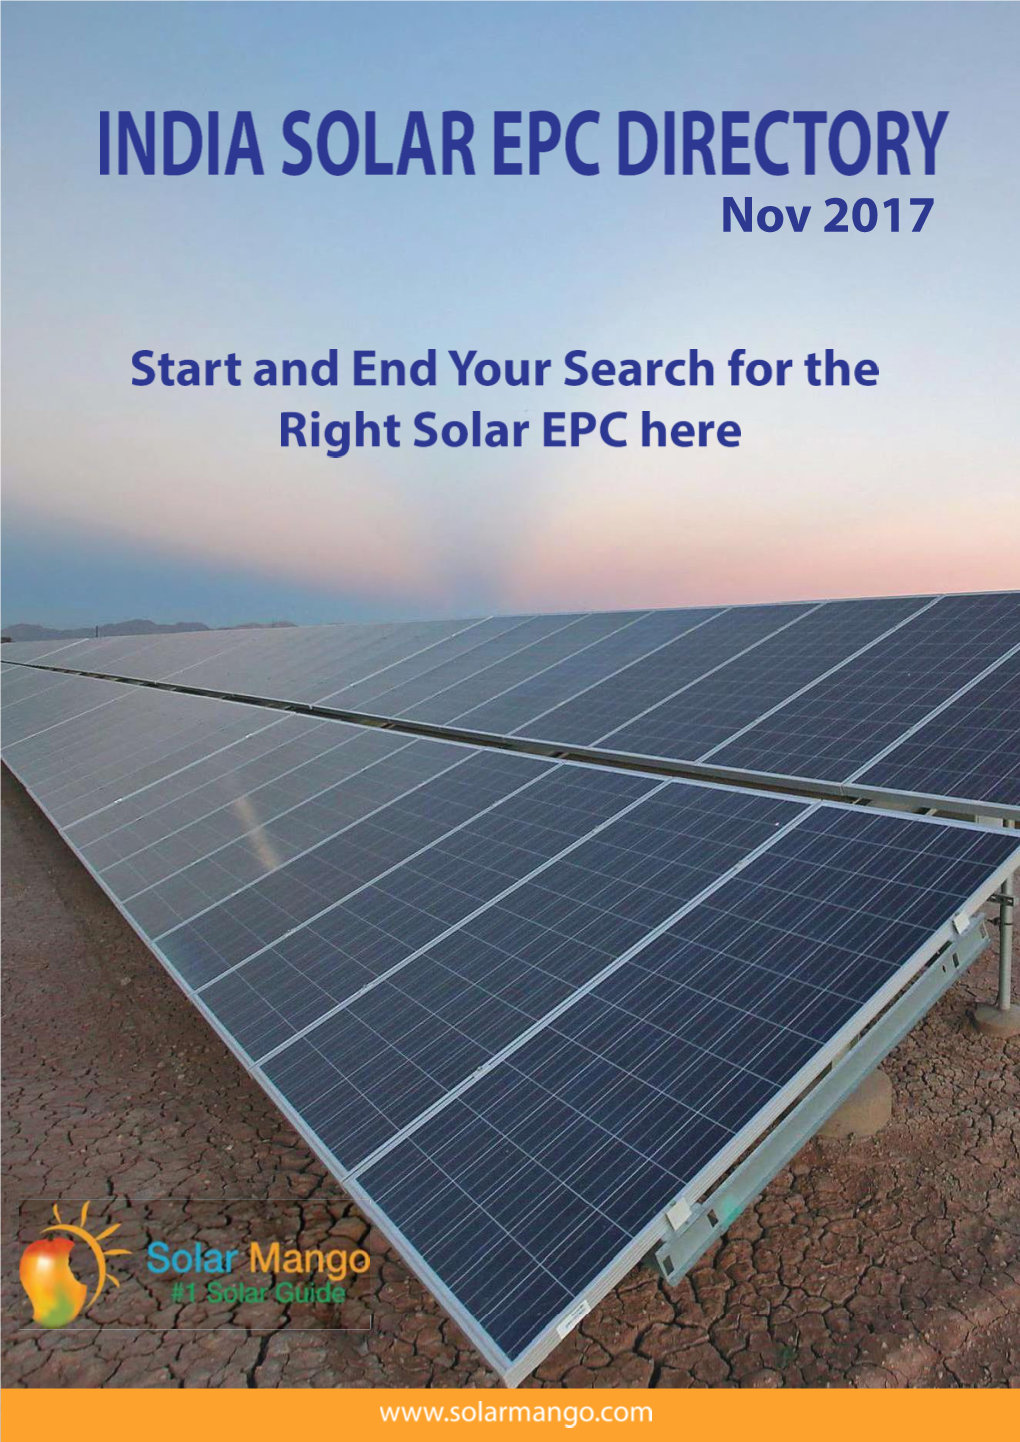 Welcome to India's First Solar EPC Directory